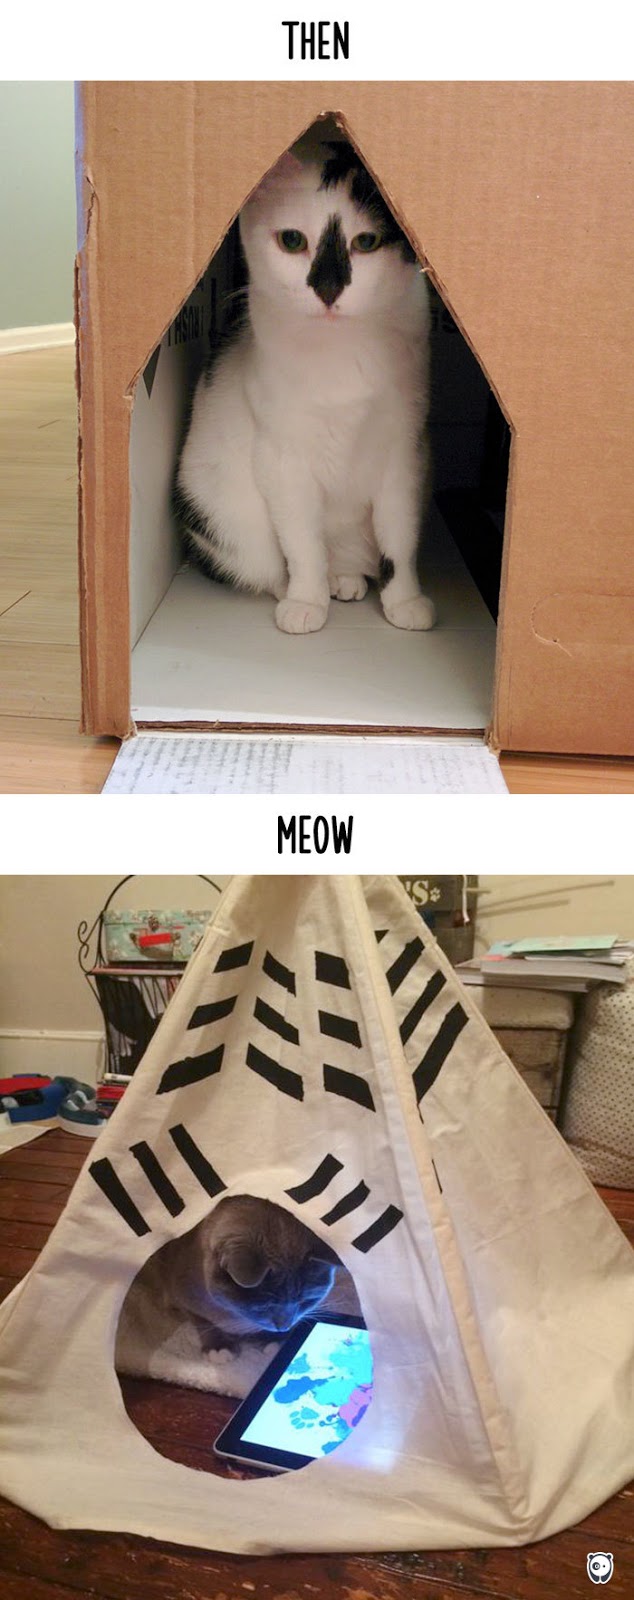 Then vs Meow How Technology Has Changed Cats’ Lives (10+ Pics) - Housing